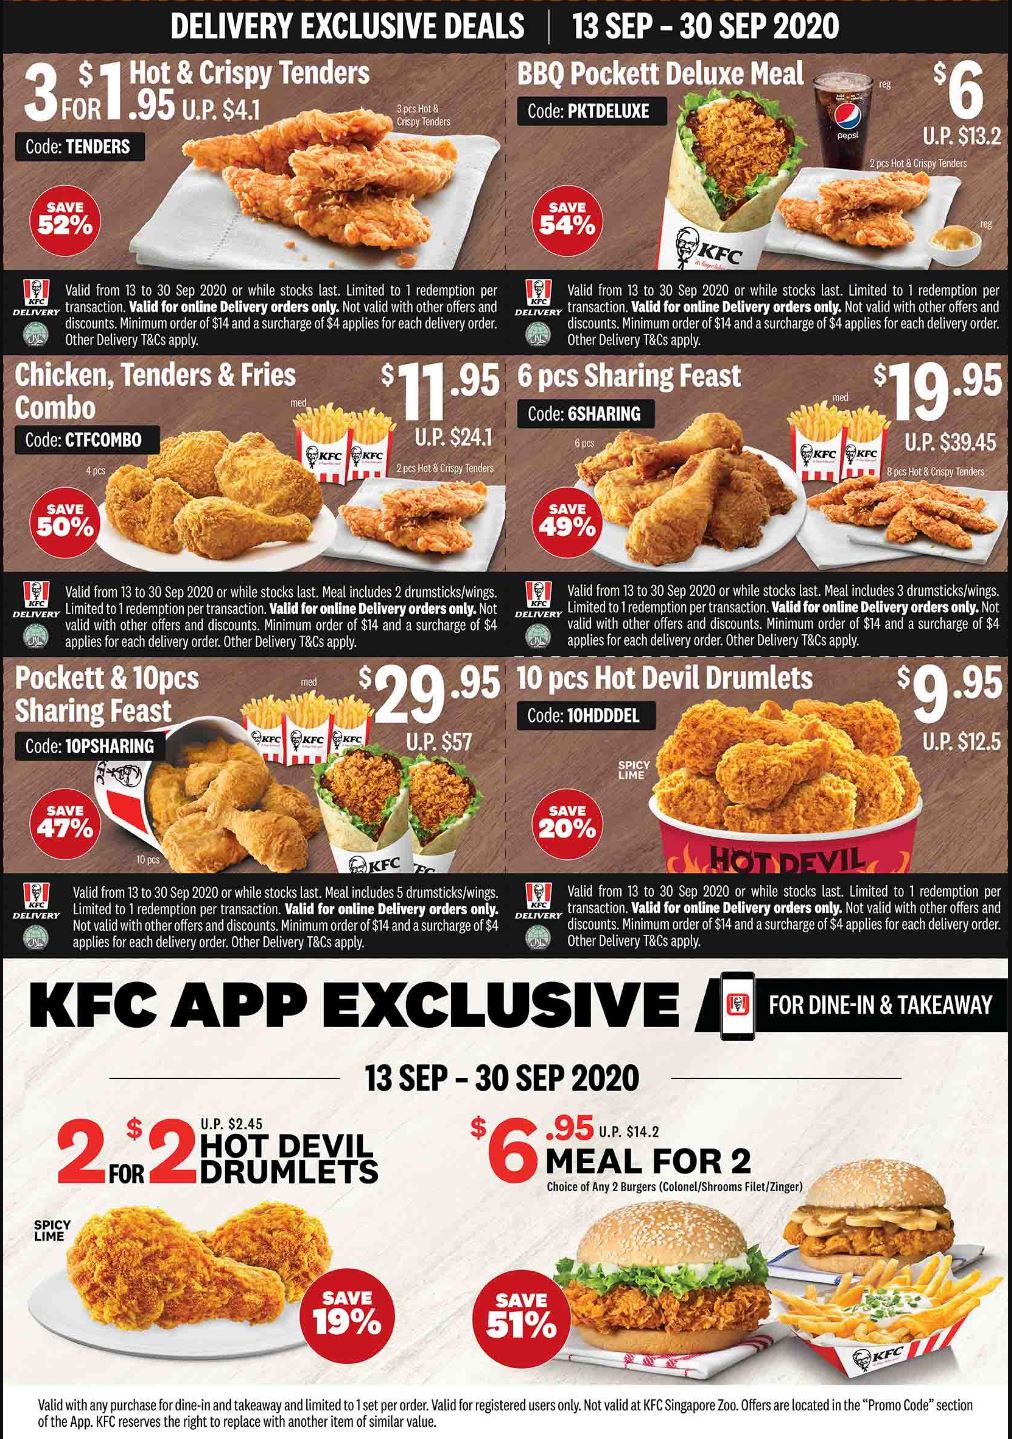 Here are the latest KFC Coupons for dine-in, takeaway and delivery from 13 – 30 Sep 20 - 3